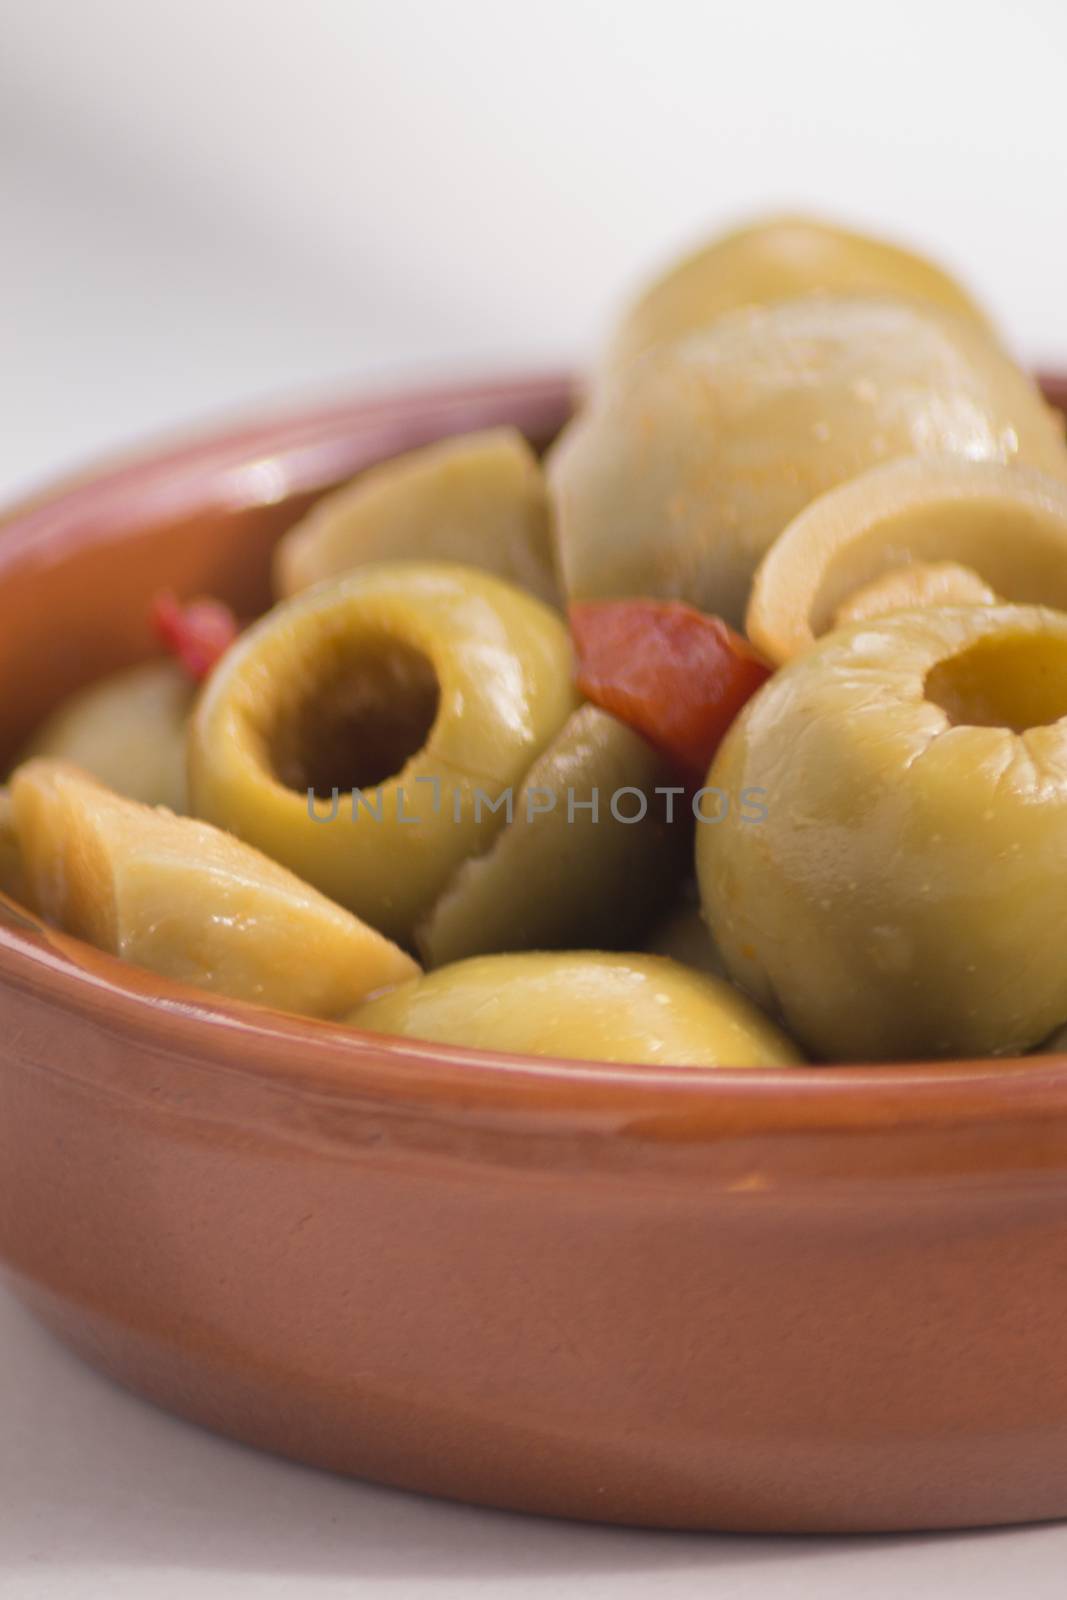 Green olives Spanish tapas bowl on table in Spain.